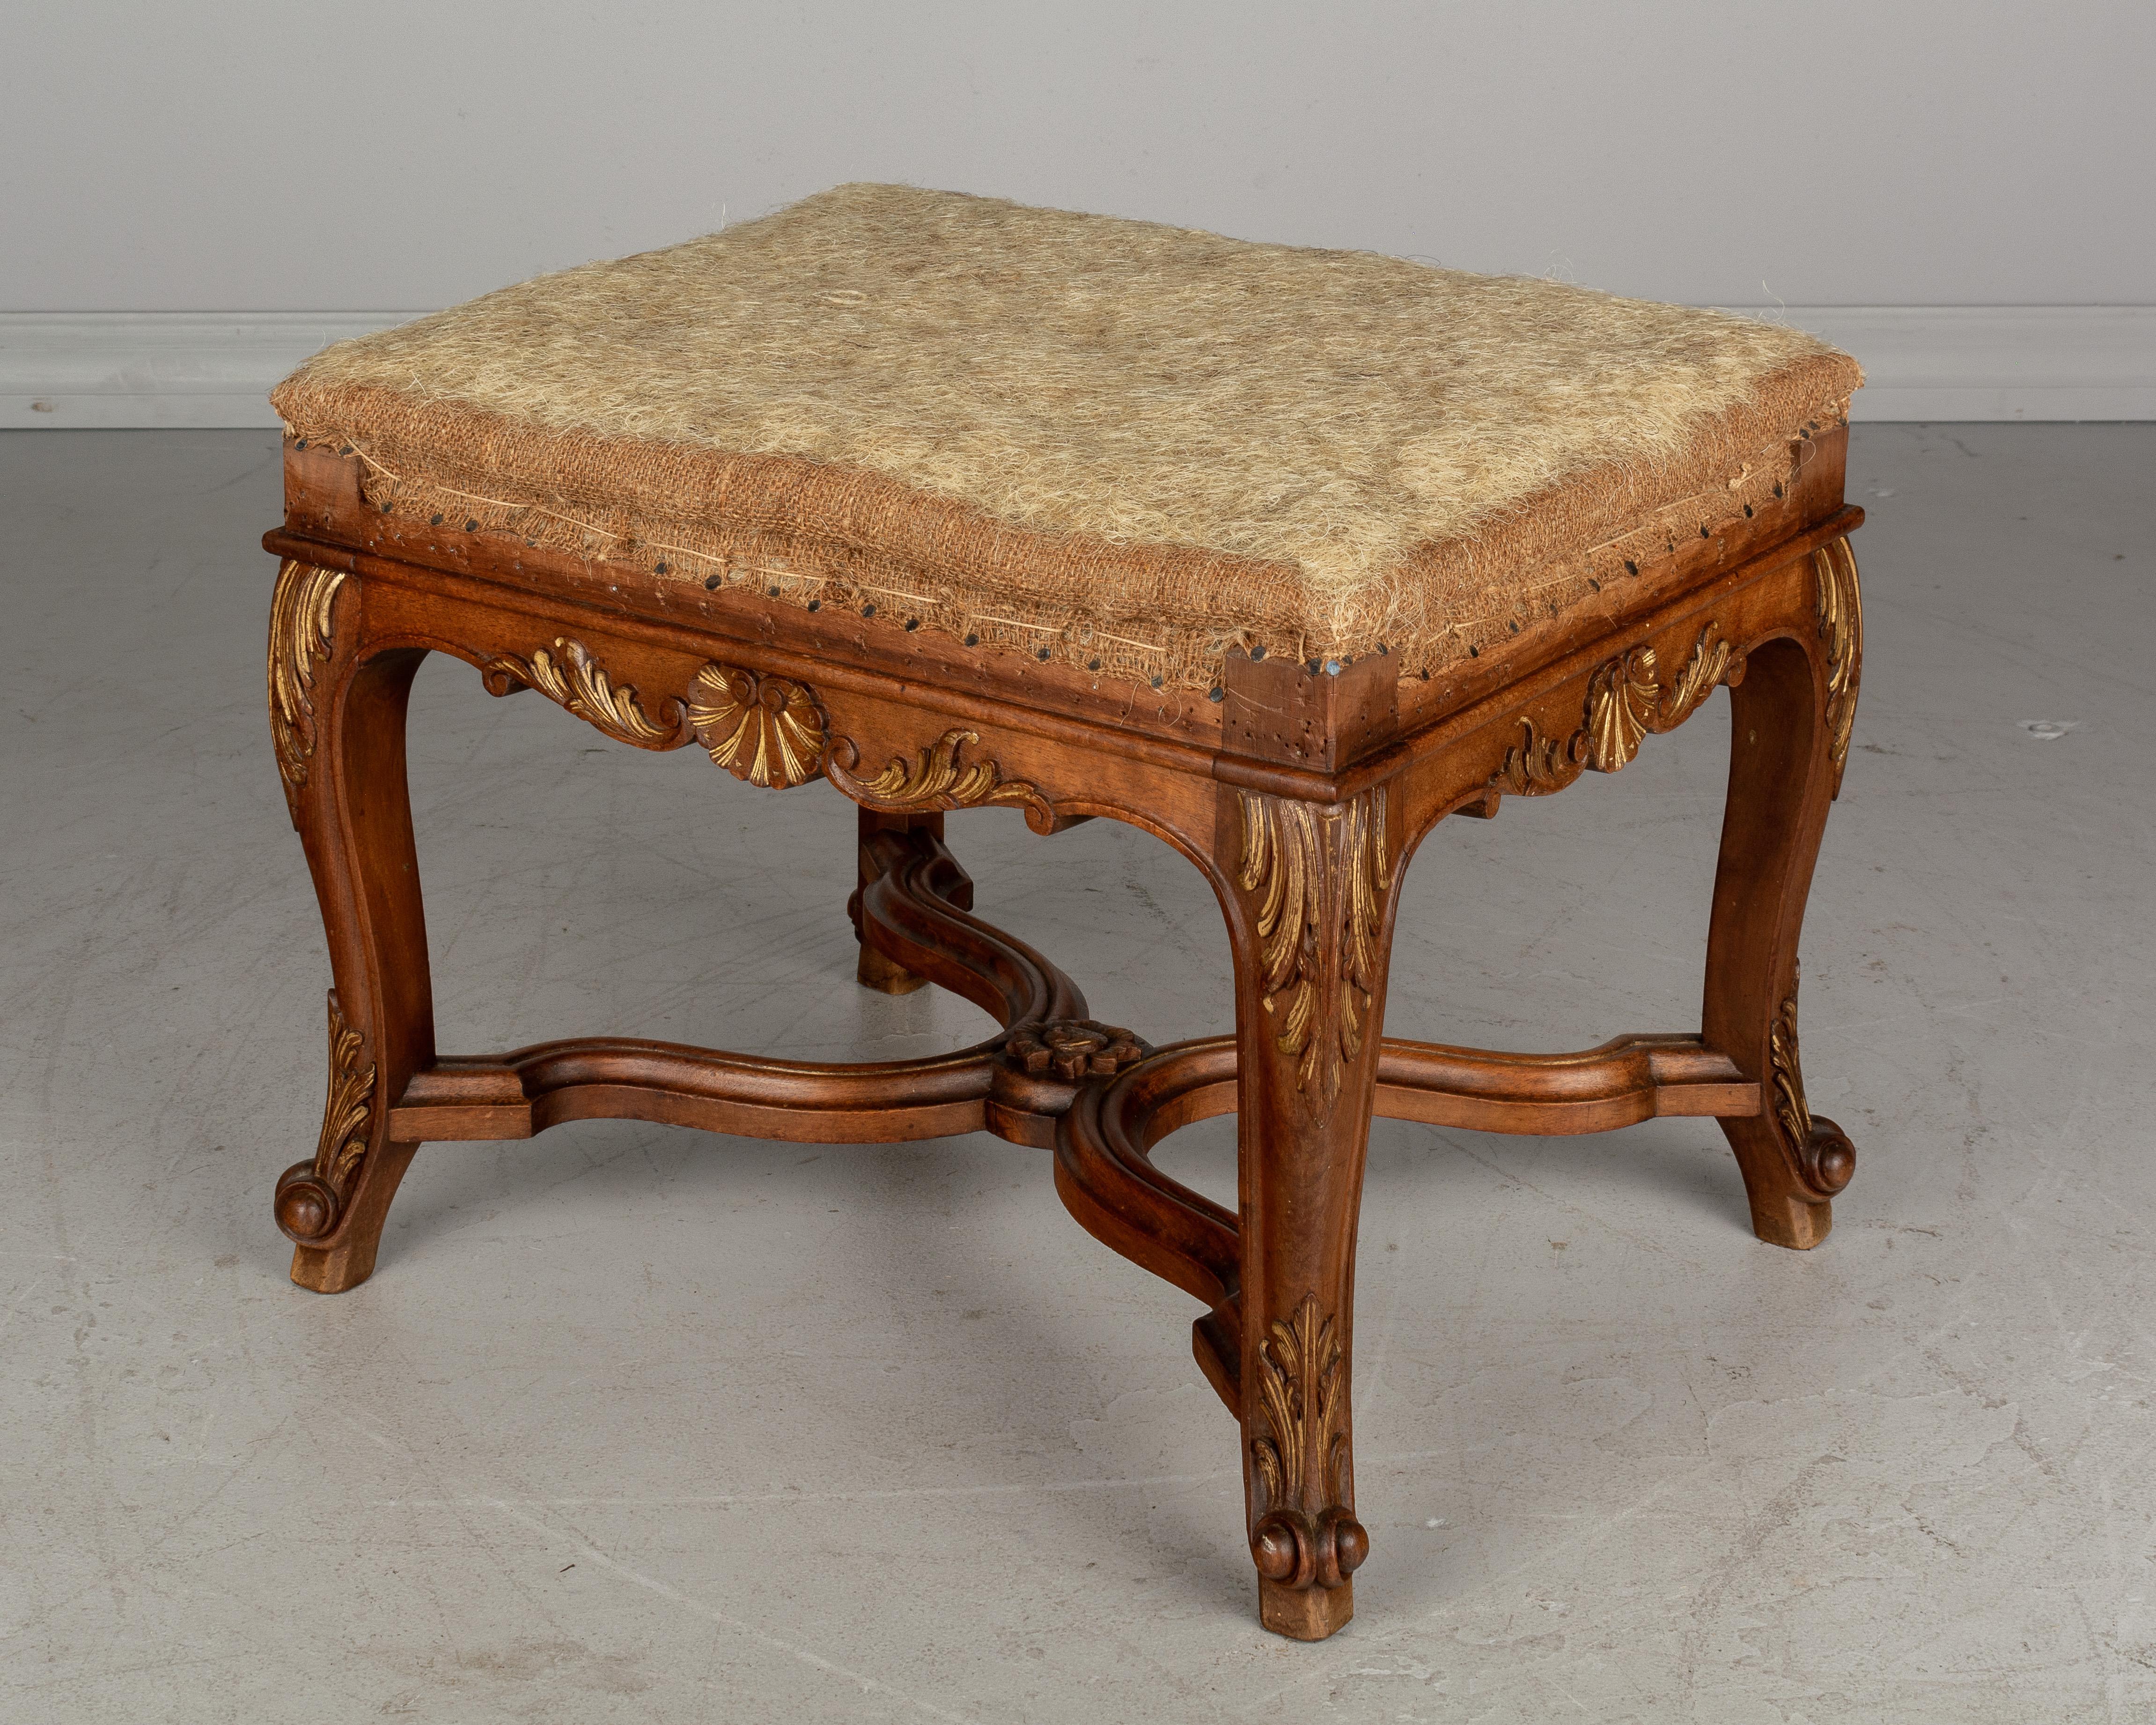 An early 20th century French Regency style foot stool or bench made of walnut with X-form stretcher. Beautiful hand carved shell motif and acanthus leaves, accented with gold leaf. Frame has been stripped of old fabric. Sold as is.